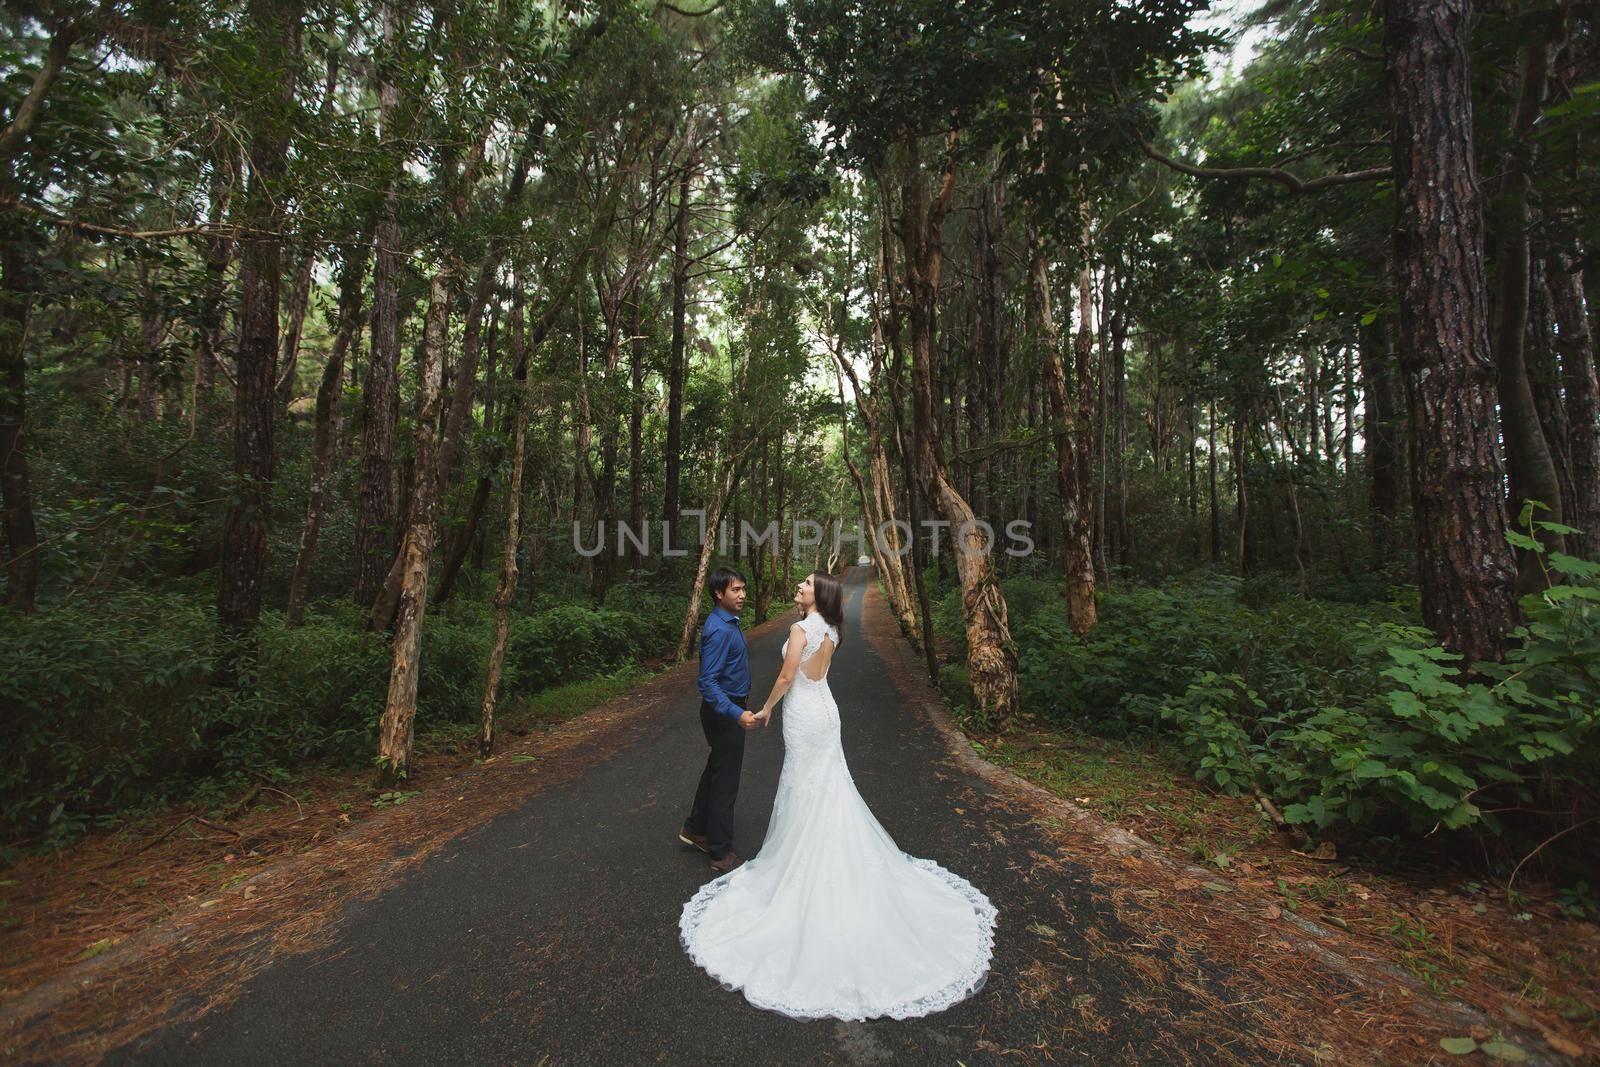 Walking the young bride and groom in the woods. by StudioPeace